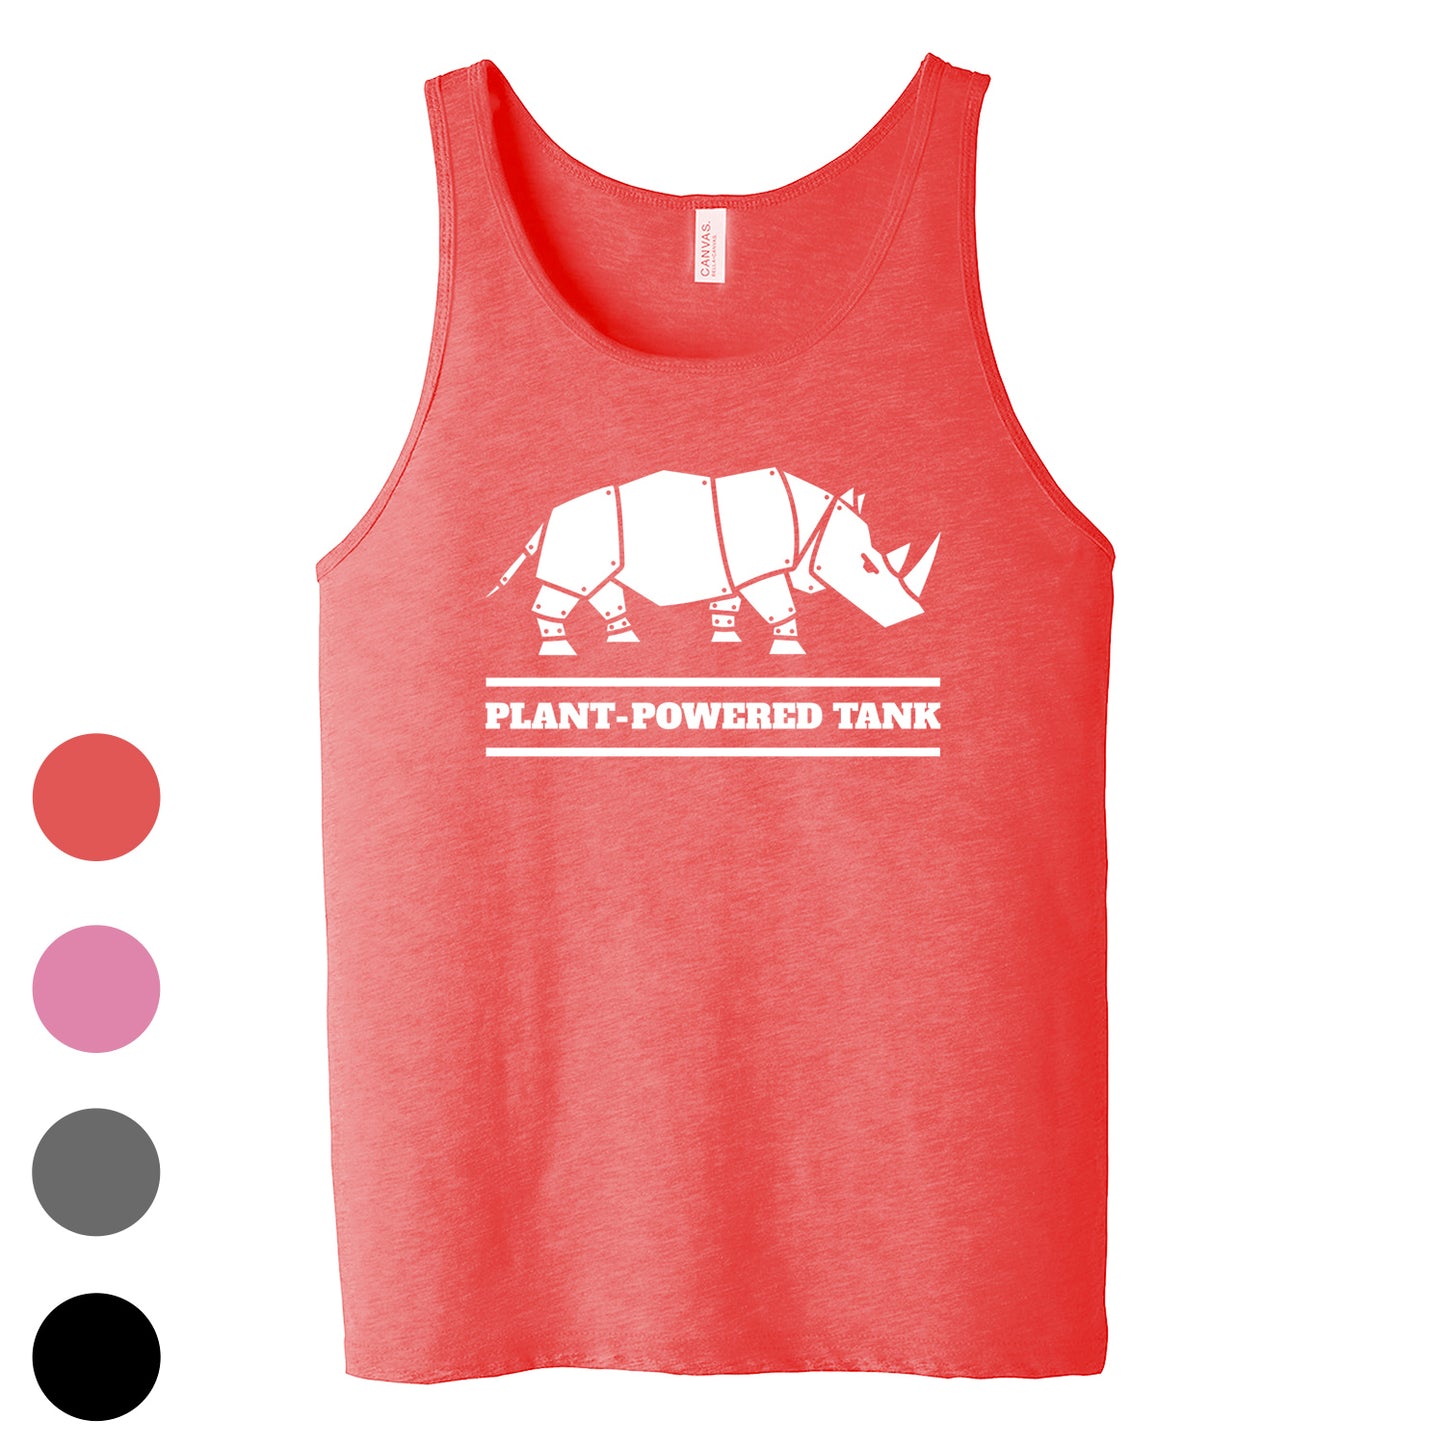 Plant-Powered Tank Mens Tank - 100% for Charity! 4 Colors